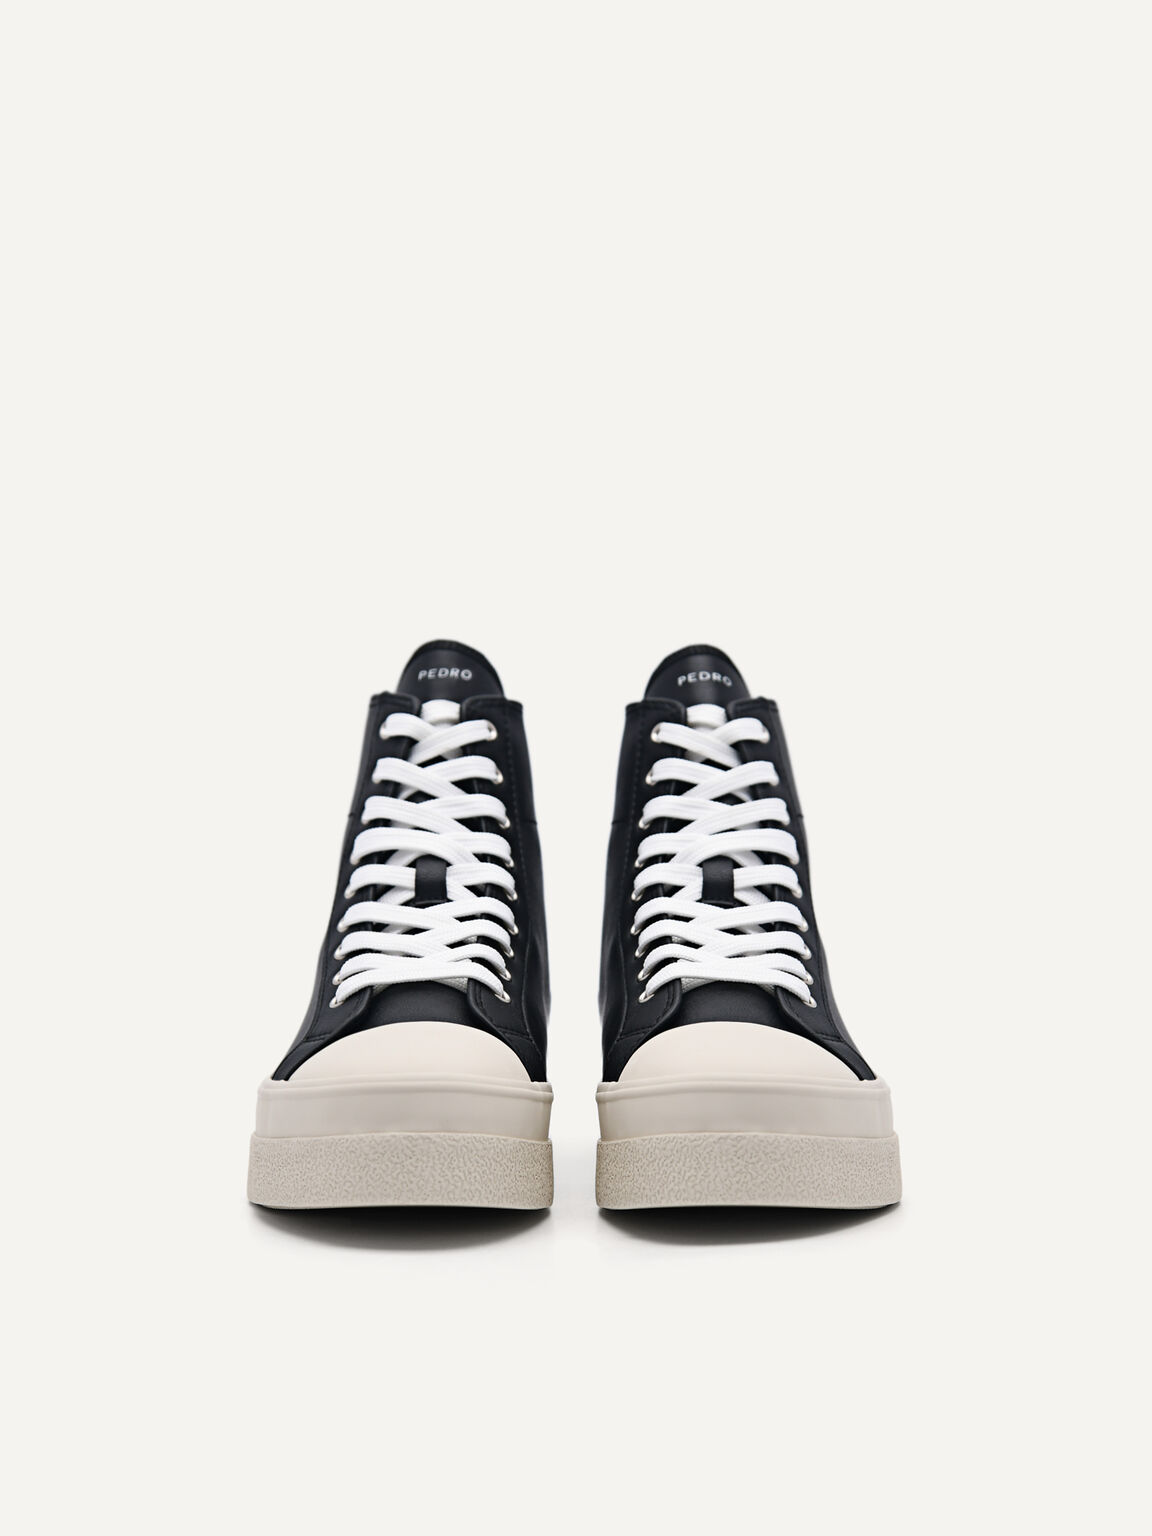 Synthetic Leather High-Cut Sneakers, Black